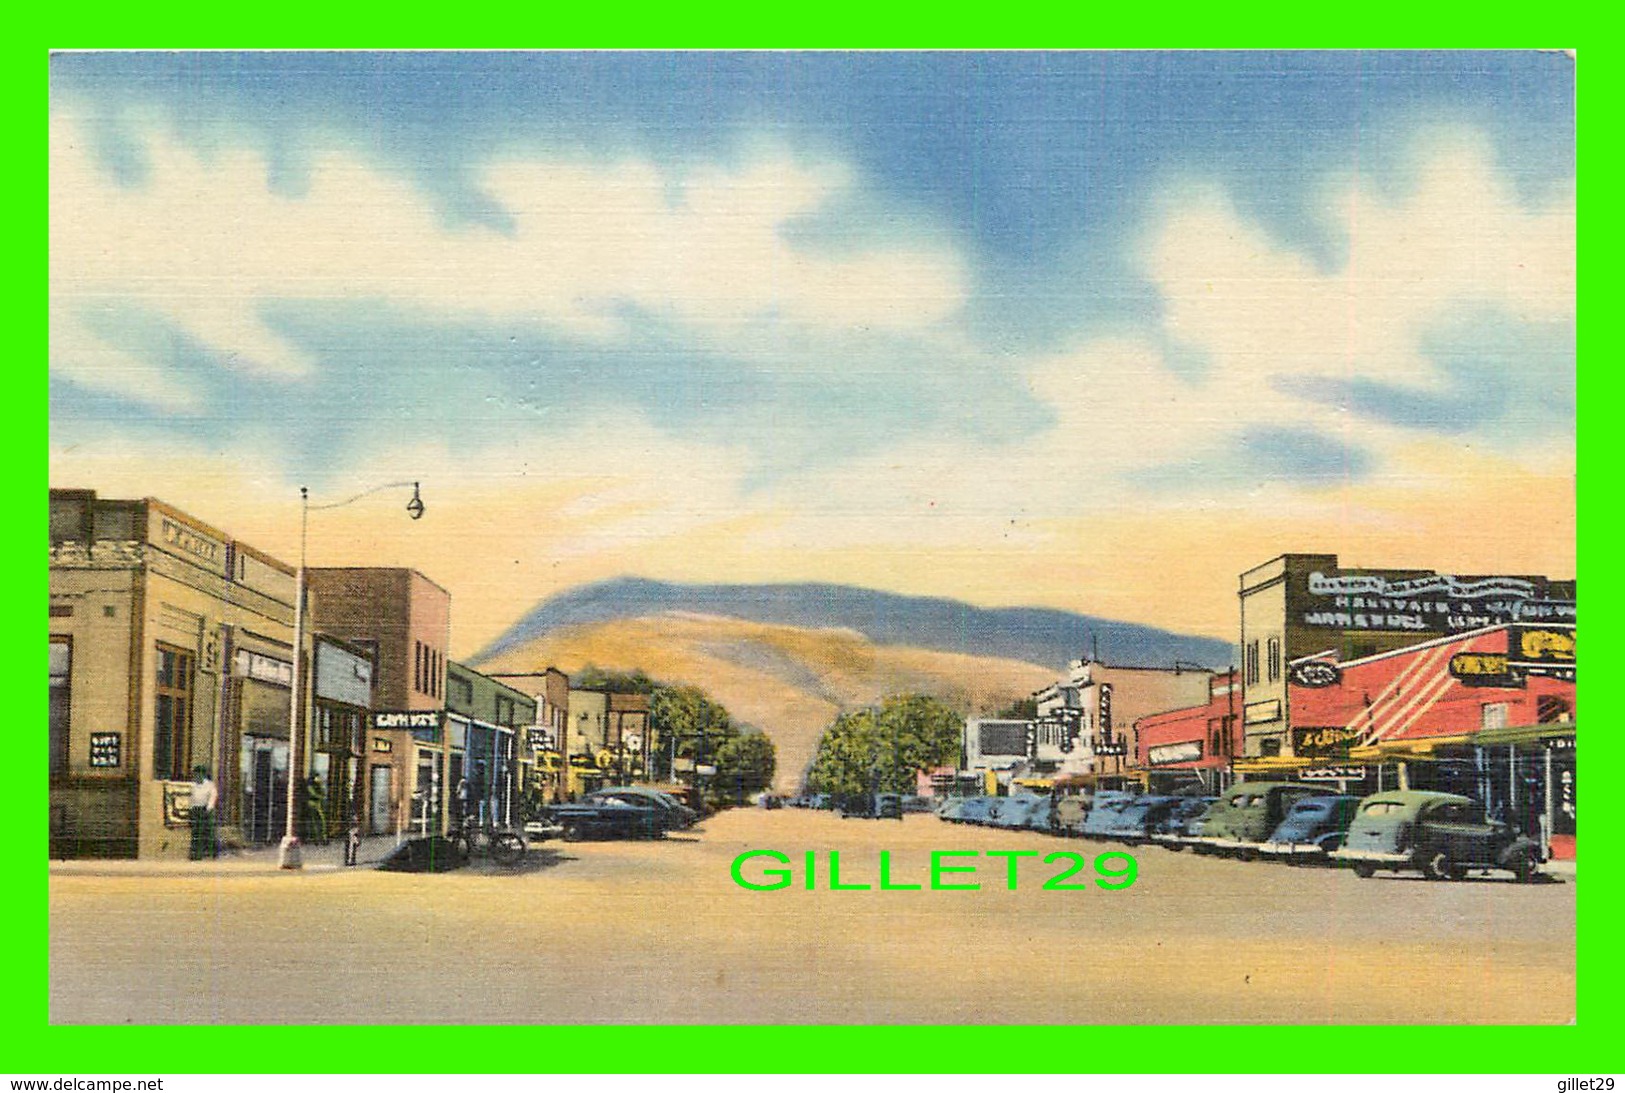 CODY, WY - MAIN STREET & BUSINESS DISTRICT - ANIMATEDWITH OLD CARS - SANBORN SOUVENIR CO - - Cody